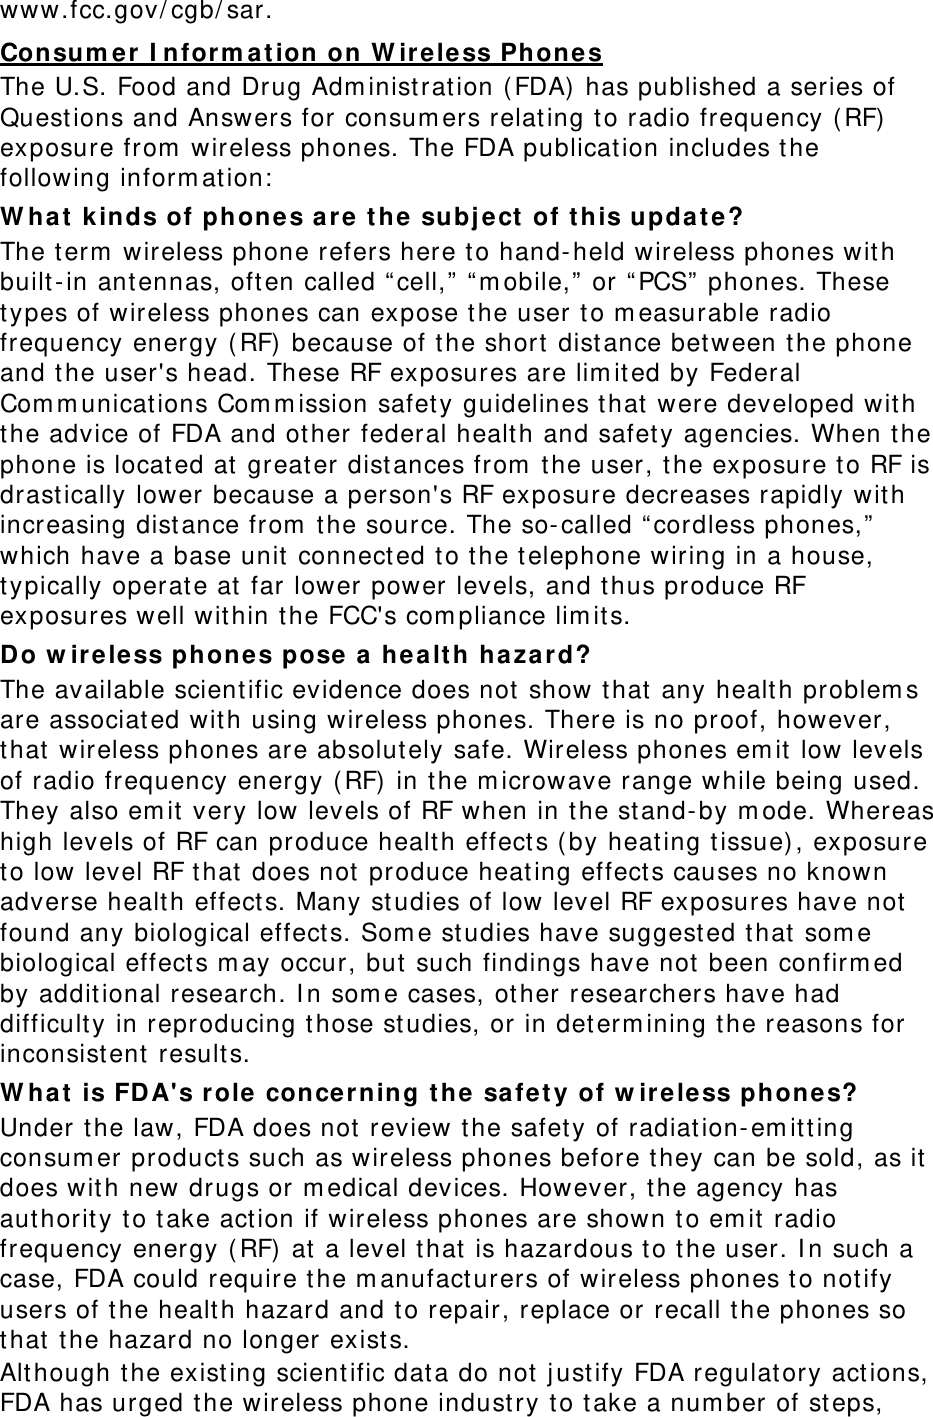 www.fcc.gov/ cgb/ sar. Consum e r  I nfor m at ion  on W ir e less Phones The U.S. Food and Drug Adm inist rat ion ( FDA)  has published a series of Questions and Answers for consum ers relating t o radio frequency ( RF)  exposure from  wireless phones. The FDA publicat ion includes the following inform ation:  W hat  k inds of phone s a r e  t he subj e ct  of t his u pdat e? The term  wireless phone refers here to hand- held wireless phones wit h built - in ant ennas, oft en called “ cell,” “ m obile,”  or “ PCS”  phones. These types of wireless phones can expose t he user t o m easurable radio frequency energy ( RF) because of t he short distance bet ween t he phone and t he user&apos;s head. These RF exposures are lim ited by Federal Com m unicat ions Com m ission safet y guidelines t hat  were developed wit h the advice of FDA and ot her federal health and safet y agencies. When t he phone is locat ed at  greater distances from  t he user, the exposure t o RF is drast ically lower because a person&apos;s RF exposure decreases rapidly with increasing dist ance from  t he source. The so- called “ cordless phones,”  which have a base unit  connect ed t o t he telephone wiring in a house, typically operat e at far lower power levels, and t hus produce RF exposures well within the FCC&apos;s com pliance lim it s. Do w irele ss phone s pose a  healt h ha zard? The available scient ific evidence does not  show t hat  any healt h problem s are associat ed wit h using wireless phones. There is no proof, however, that  wireless phones are absolutely safe. Wireless phones em it  low levels of radio frequency energy ( RF)  in t he m icrowave range while being used. They also em it very low levels of RF when in t he st and- by m ode. Whereas high levels of RF can produce health effect s ( by heating t issue) , exposure to low level RF t hat  does not  produce heat ing effect s causes no known adverse health effects. Many studies of low level RF exposures have not  found any biological effects. Som e st udies have suggest ed that  som e biological effect s m ay occur, but  such findings have not  been confirm ed by addit ional research. I n som e cases, ot her researchers have had difficult y in reproducing t hose st udies, or in det erm ining t he reasons for inconsistent result s. W hat  is FDA&apos;s r ole concerning t he sa fet y of w irele ss phones? Under t he law, FDA does not  review the safety of radiat ion-em itt ing consum er product s such as wireless phones before t hey can be sold, as it  does wit h new drugs or m edical devices. However, t he agency has authorit y t o t ake action if wireless phones are shown t o em it radio frequency energy ( RF) at  a level t hat  is hazardous to t he user. I n such a case, FDA could require t he m anufacturers of wireless phones t o not ify users of t he healt h hazard and to repair, replace or recall t he phones so that  t he hazard no longer exists. Alt hough t he exist ing scient ific dat a do not  justify FDA regulat ory act ions, FDA has urged t he wireless phone indust ry to t ake a num ber of st eps, 